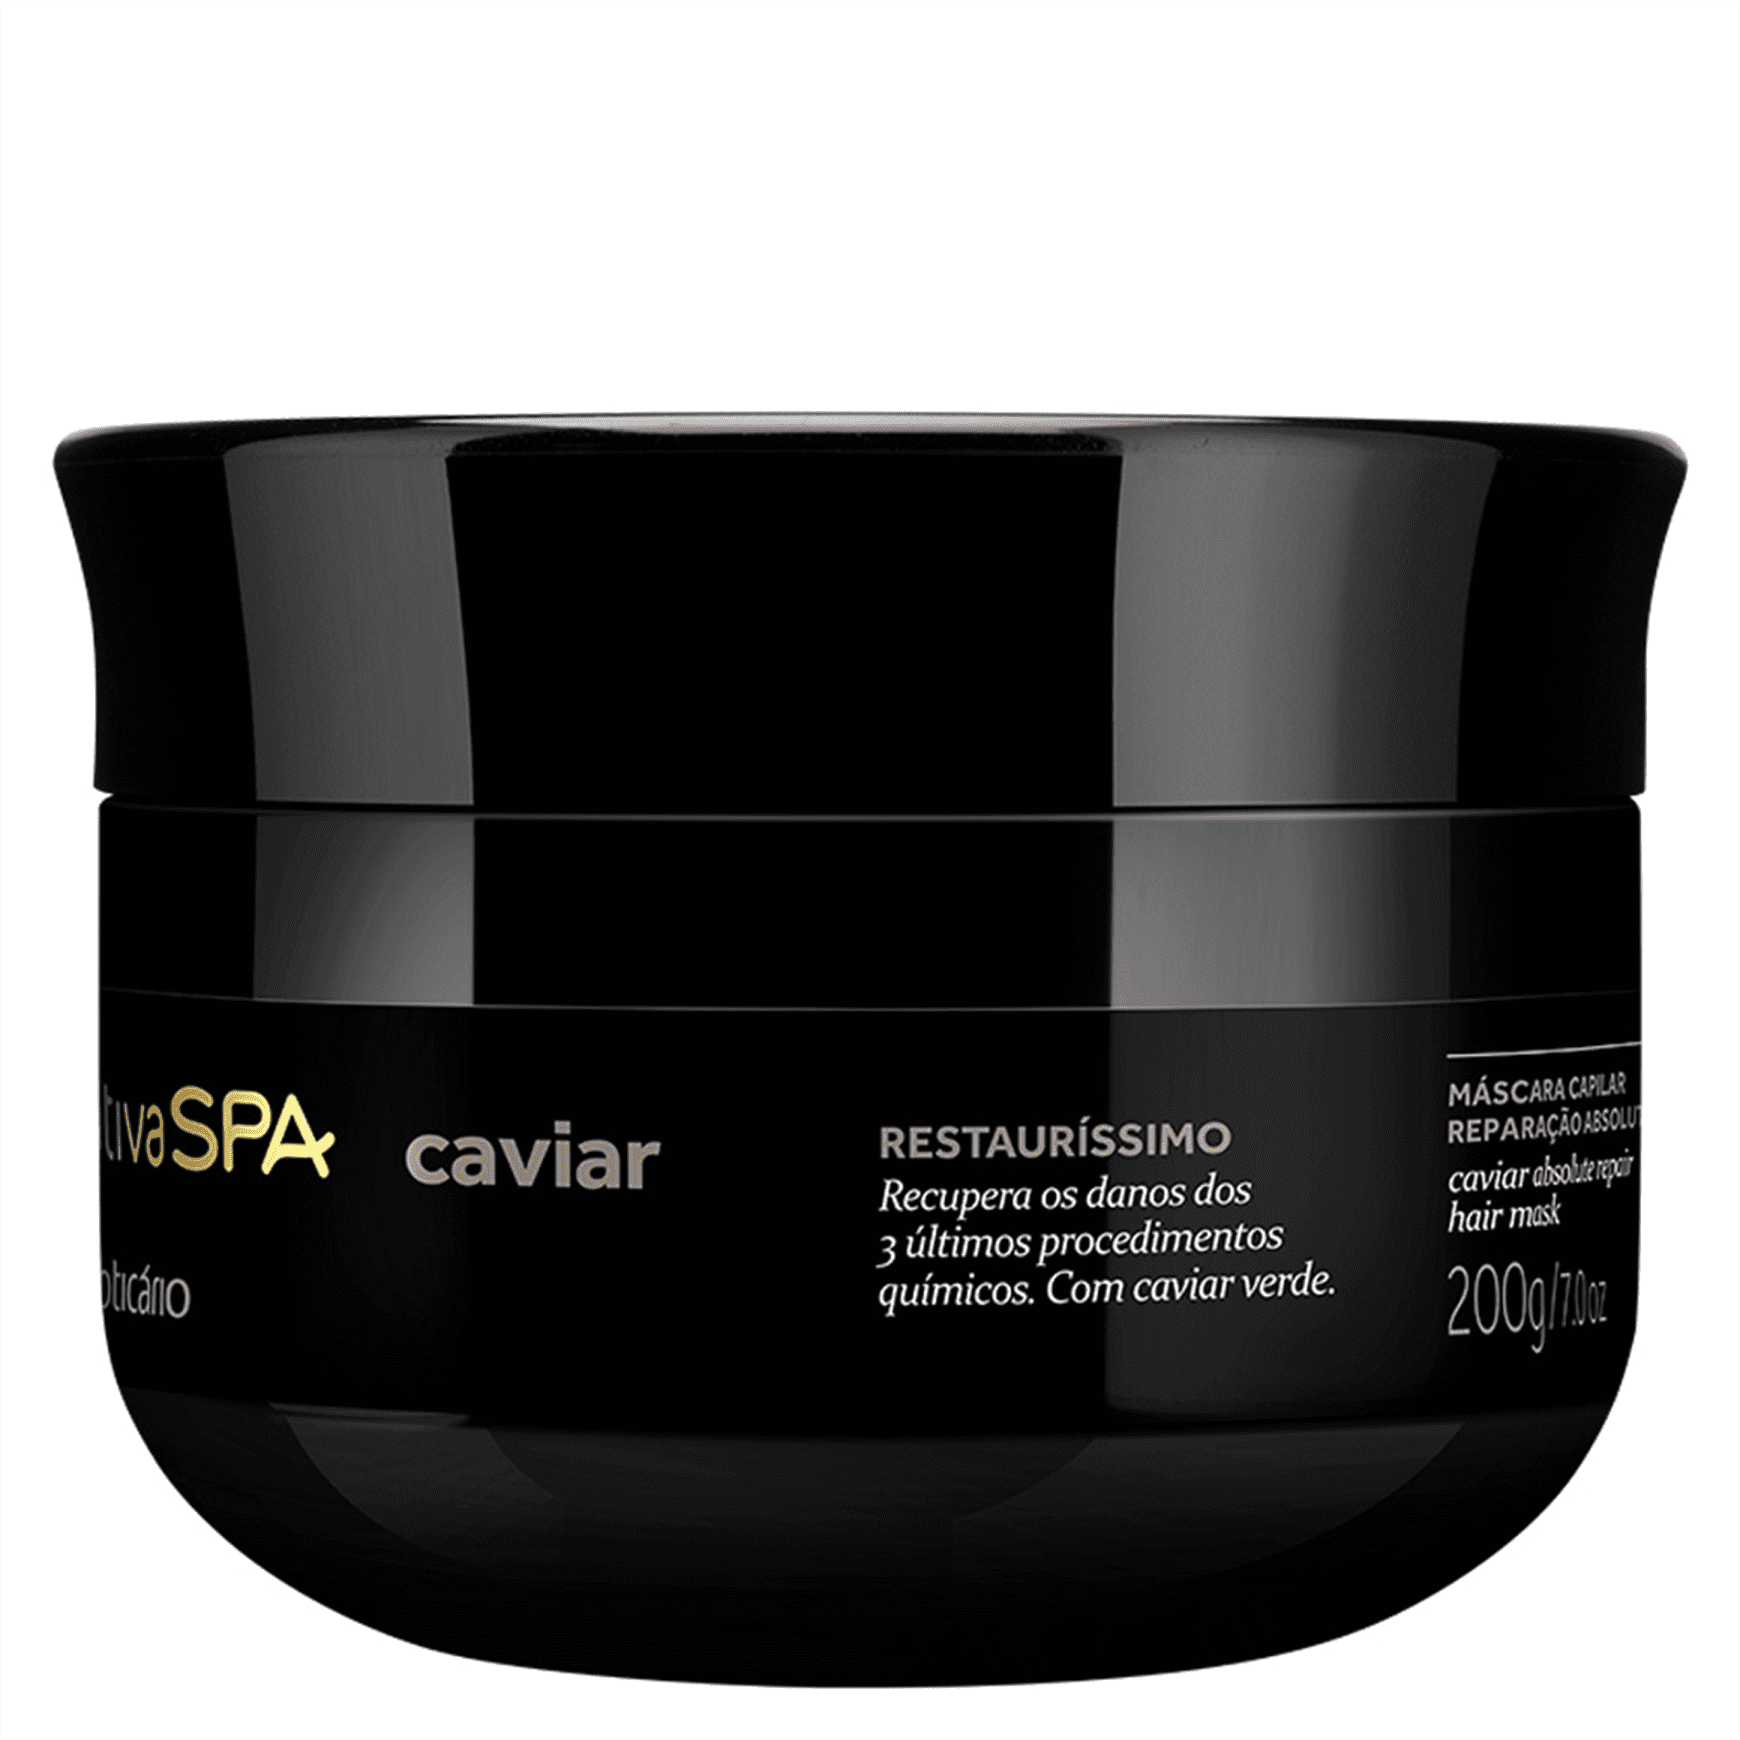 Nativa SPA Caviar Hair Mask for Repaired Hair 200g